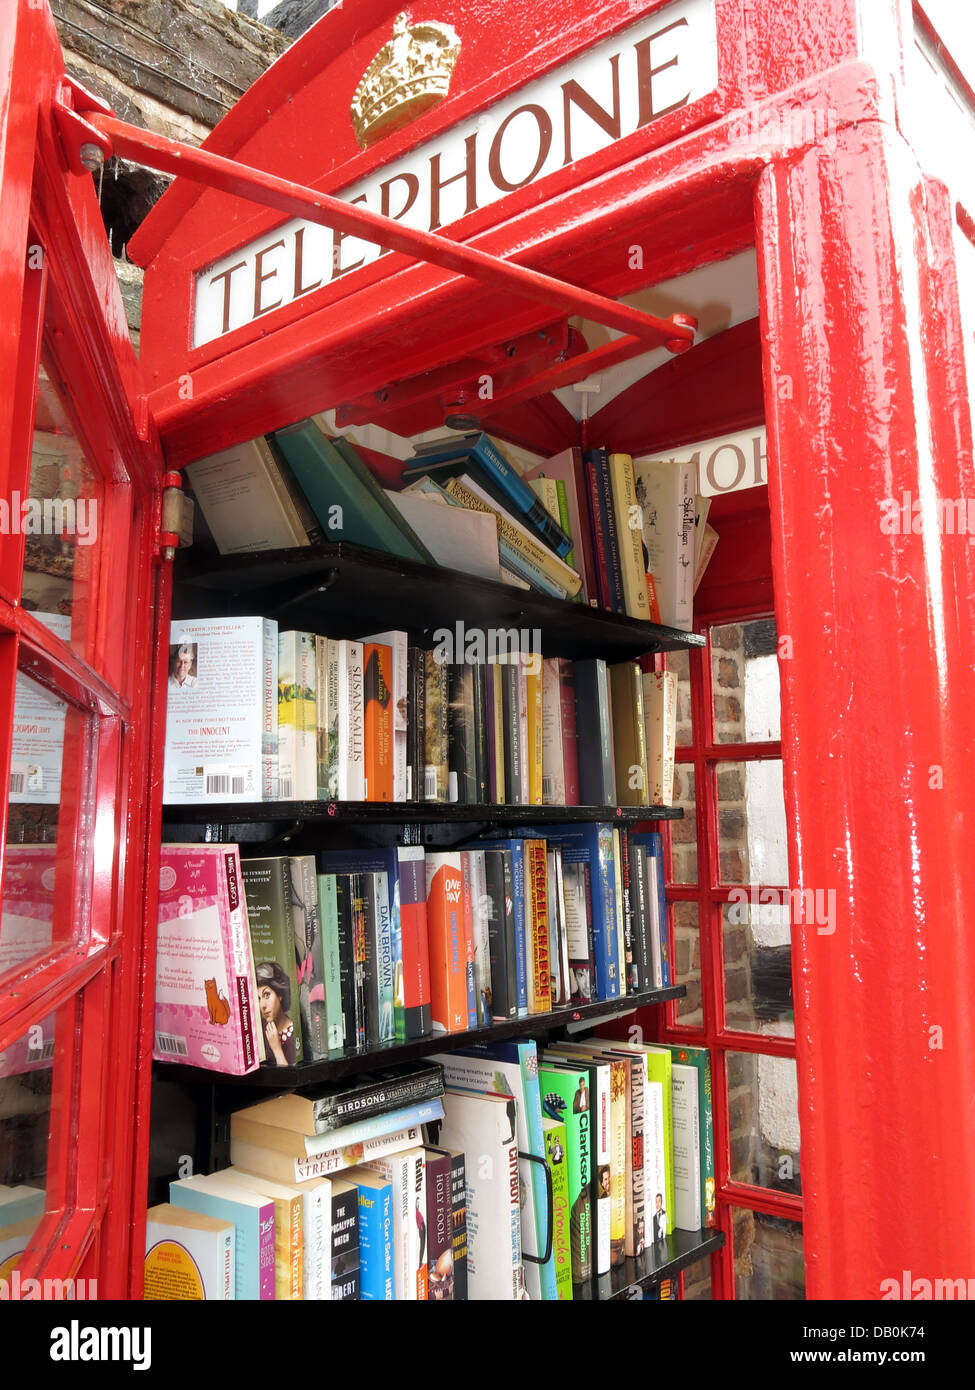 Interior of an old red British Telephone box turned into a British village eccentric lending library Stock Photo